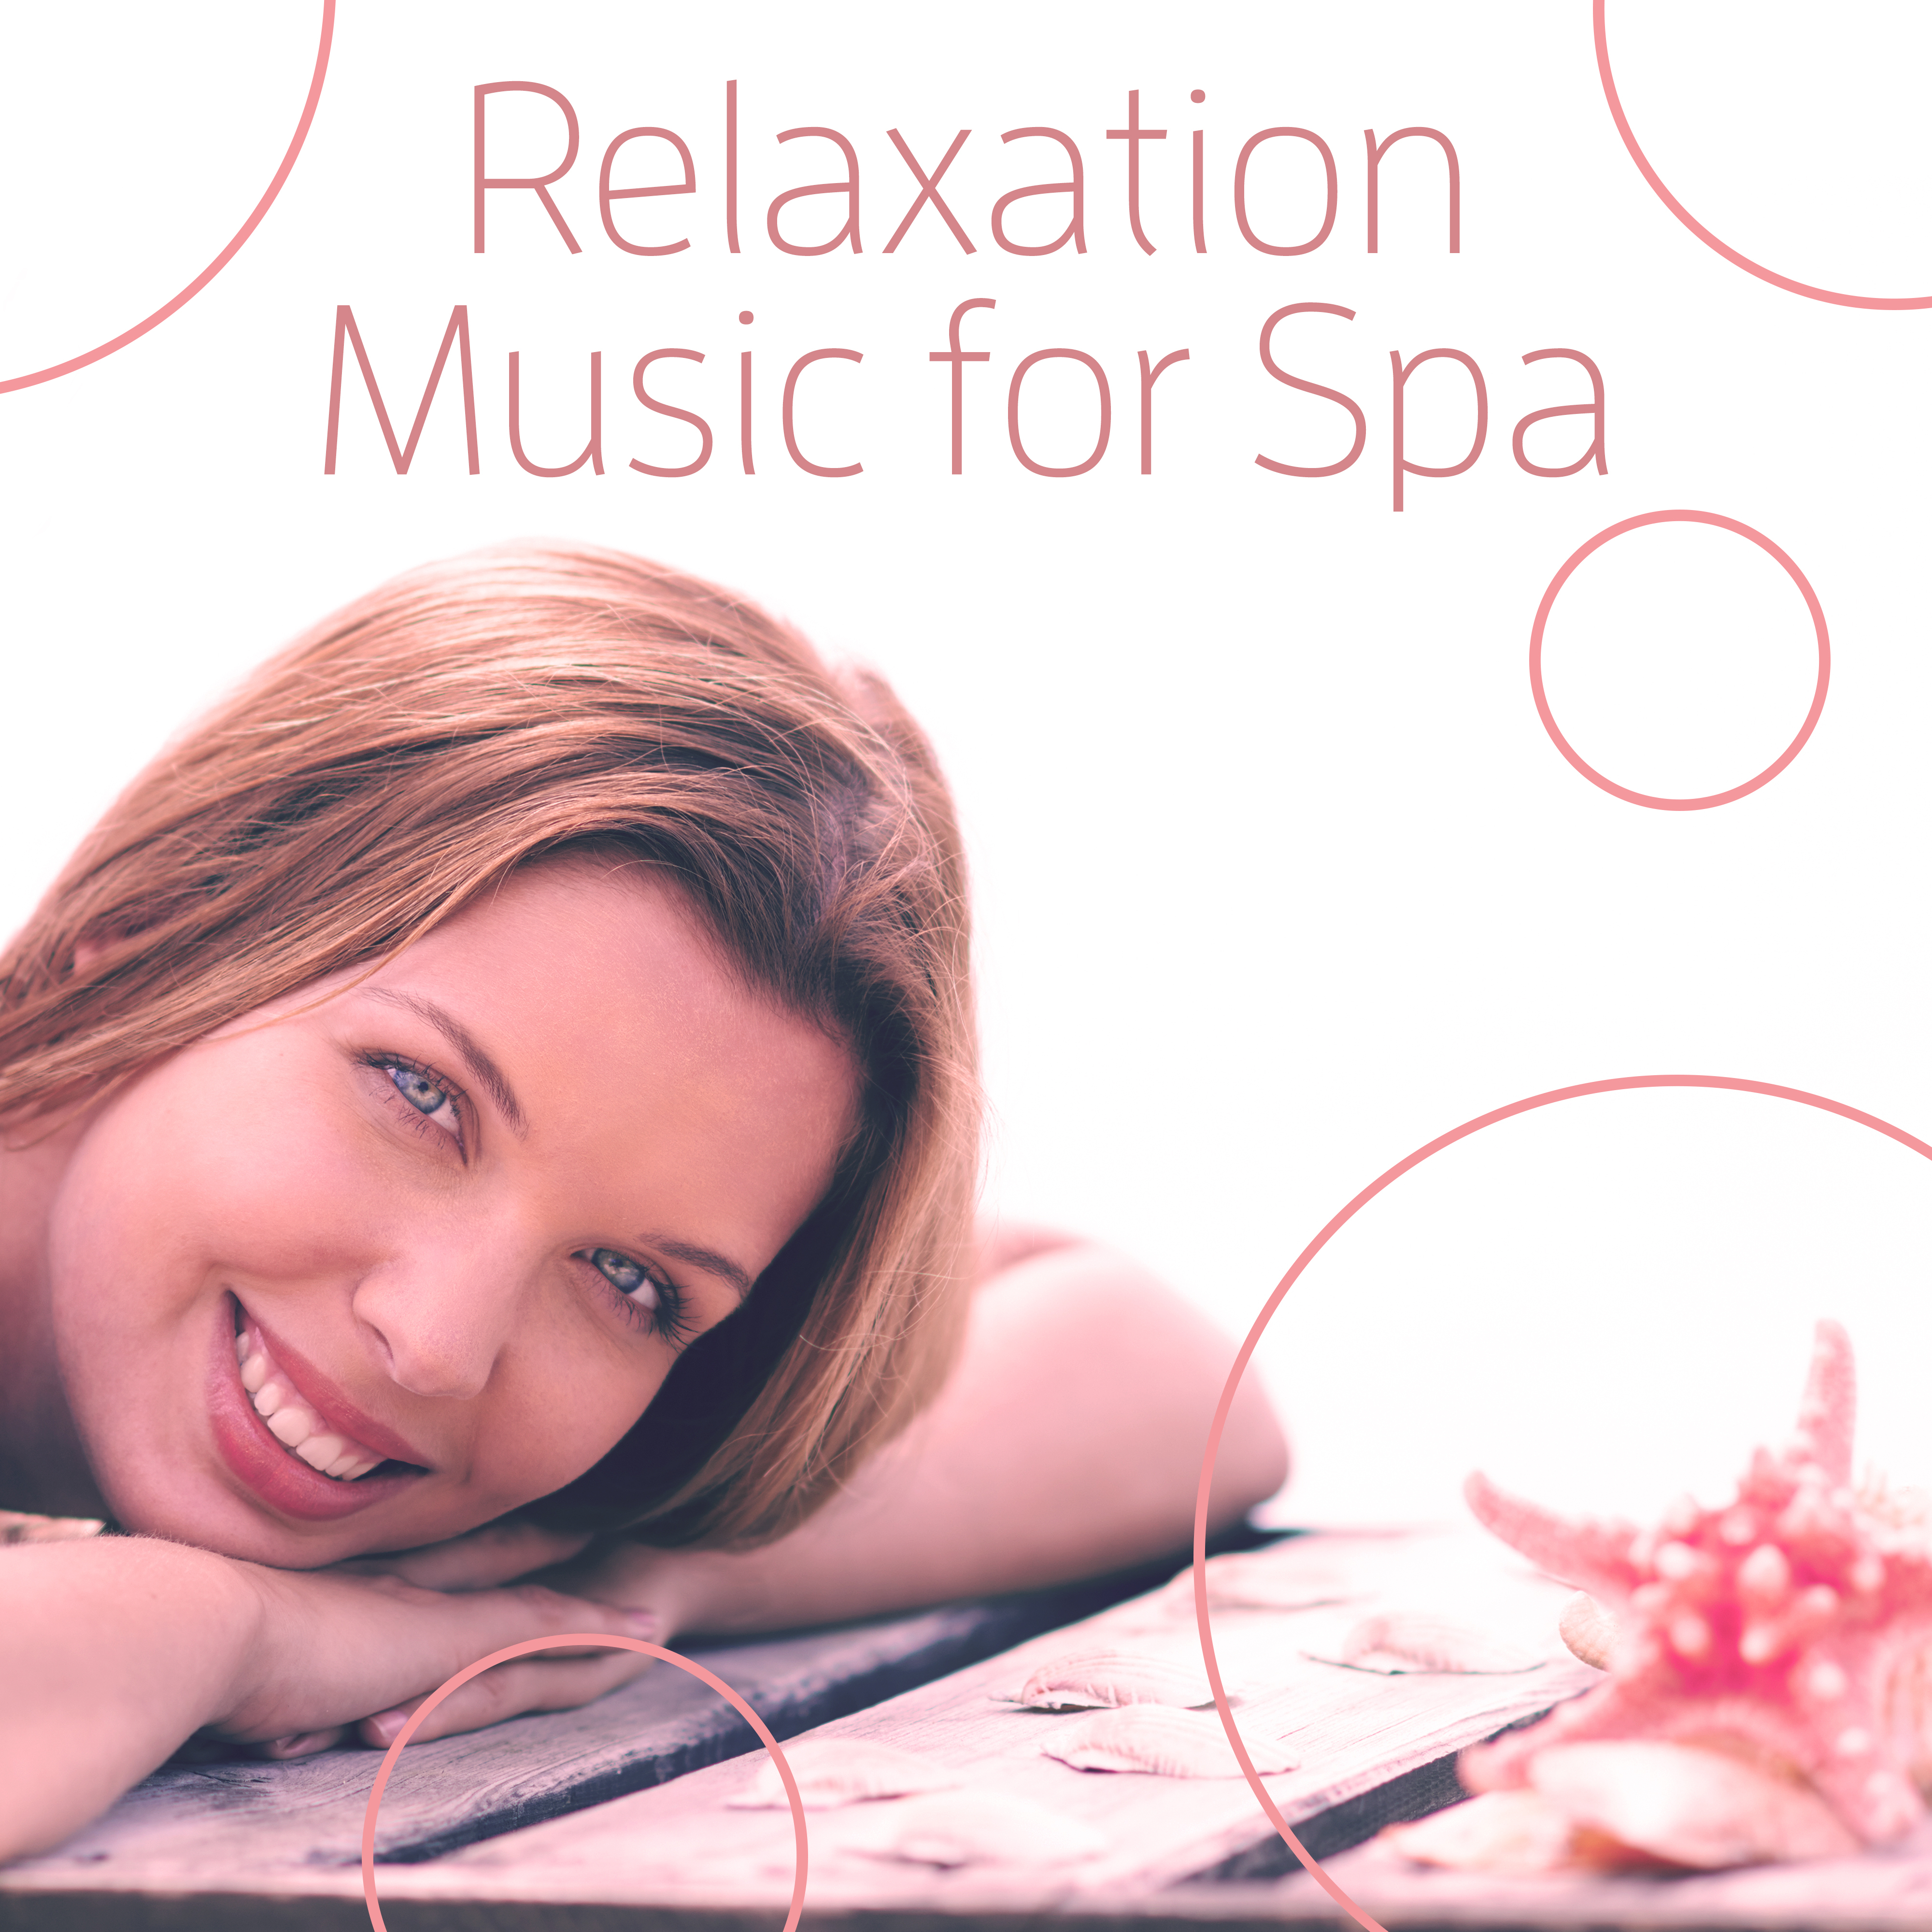 Relaxation Music for Spa  Calming Music for Massage, Spa Lounge Music , Pure Massage, Relaxing Therapy